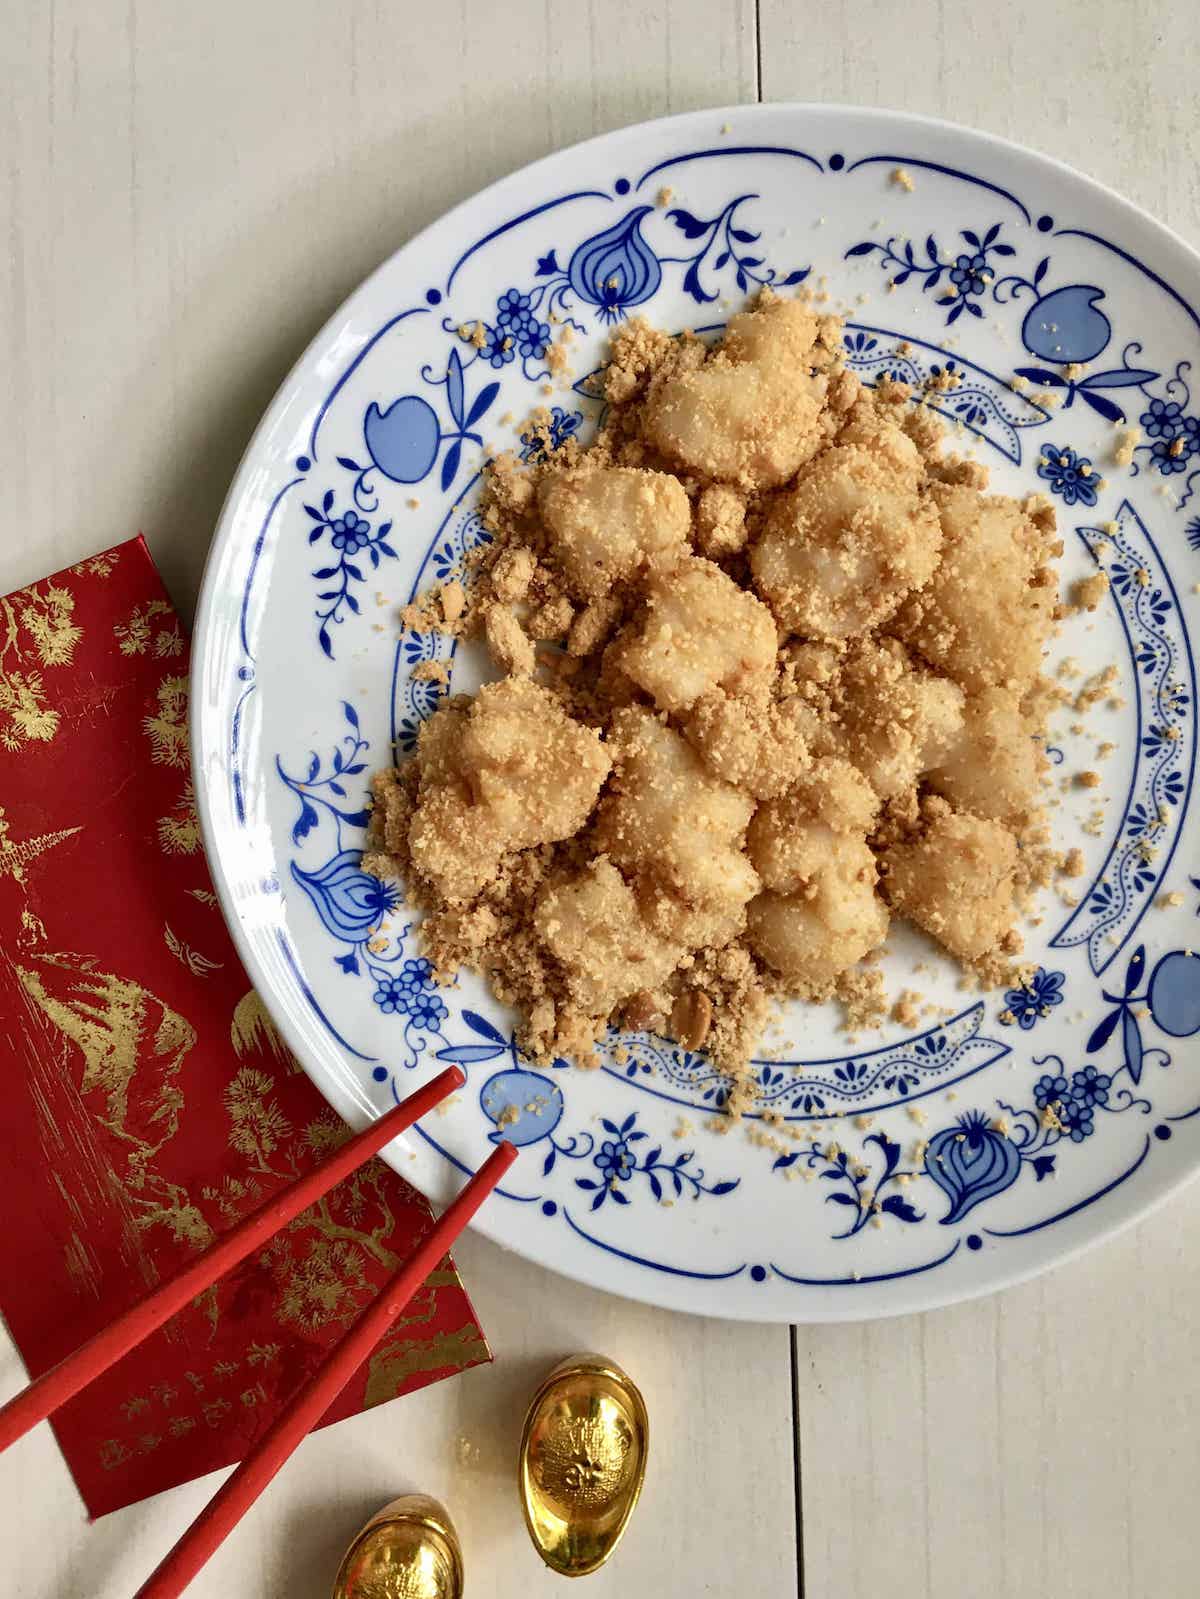 Muah chee- the Chinese equivalent of mochi- coated with peanuts on a white and blue plate